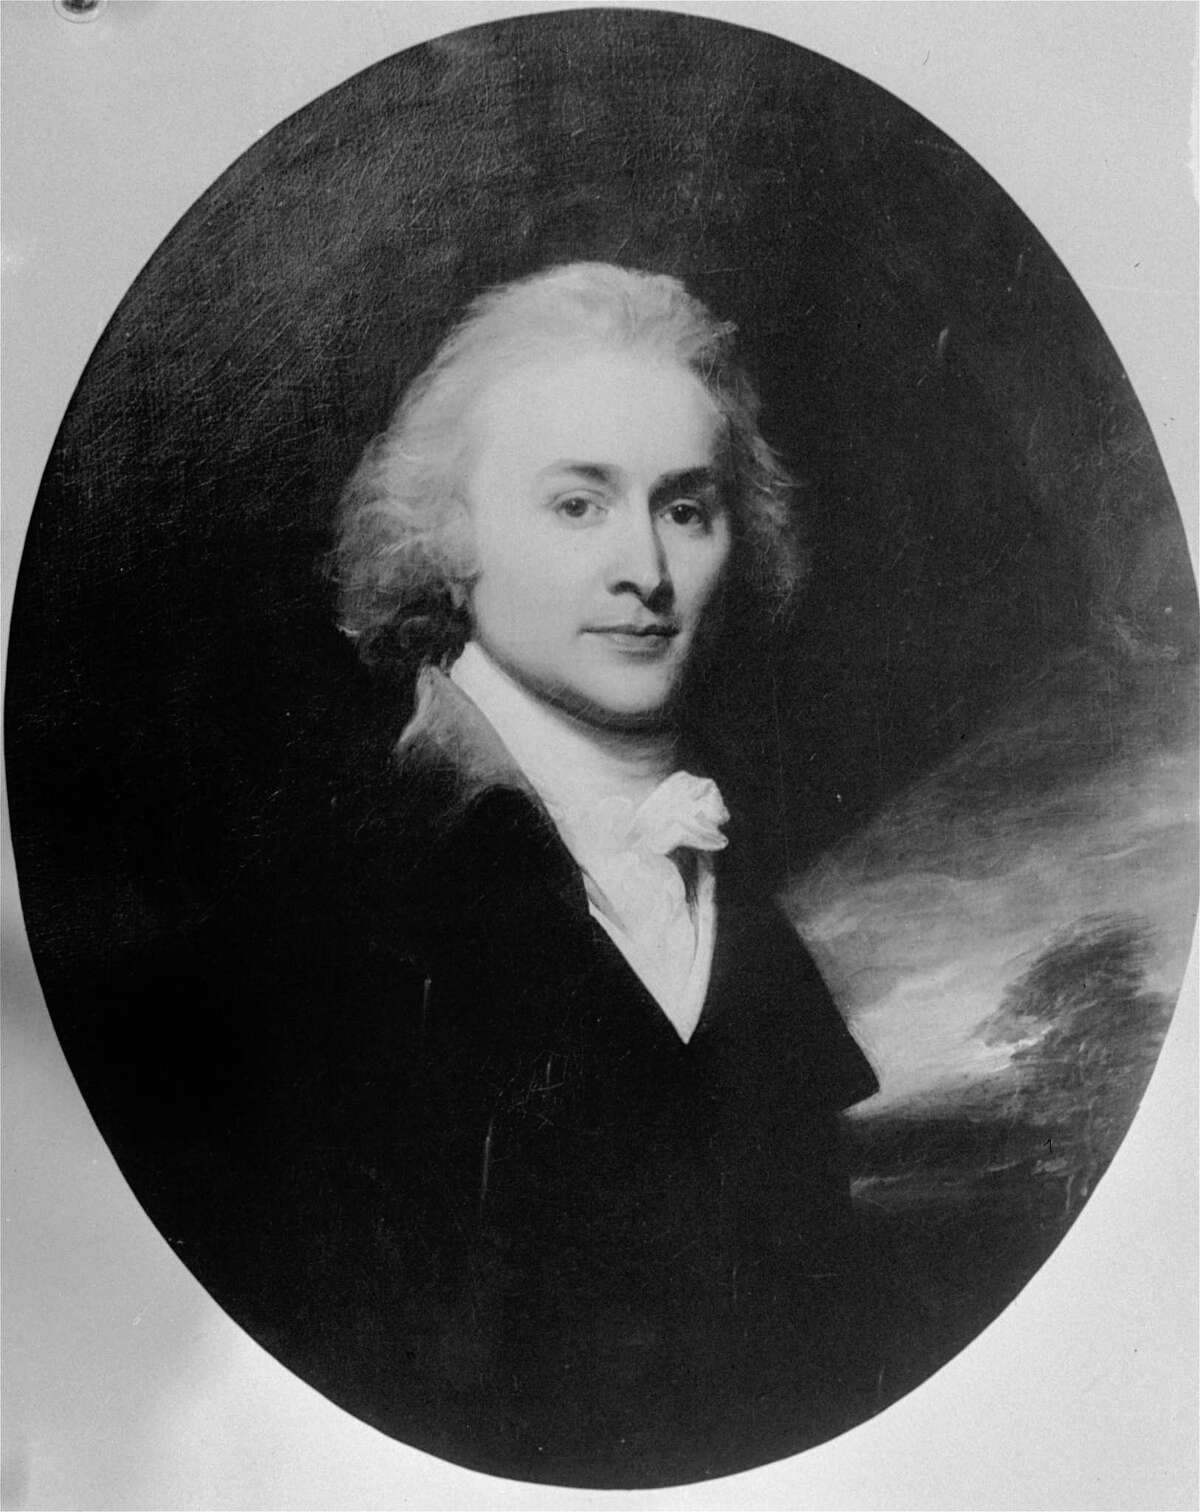 An undated portrait of John Quincy Adams, sixth president of the U.S., from 1825 to 1829. Adams was one of five U.S. presidential candidates who won despite having fewer popular votes.